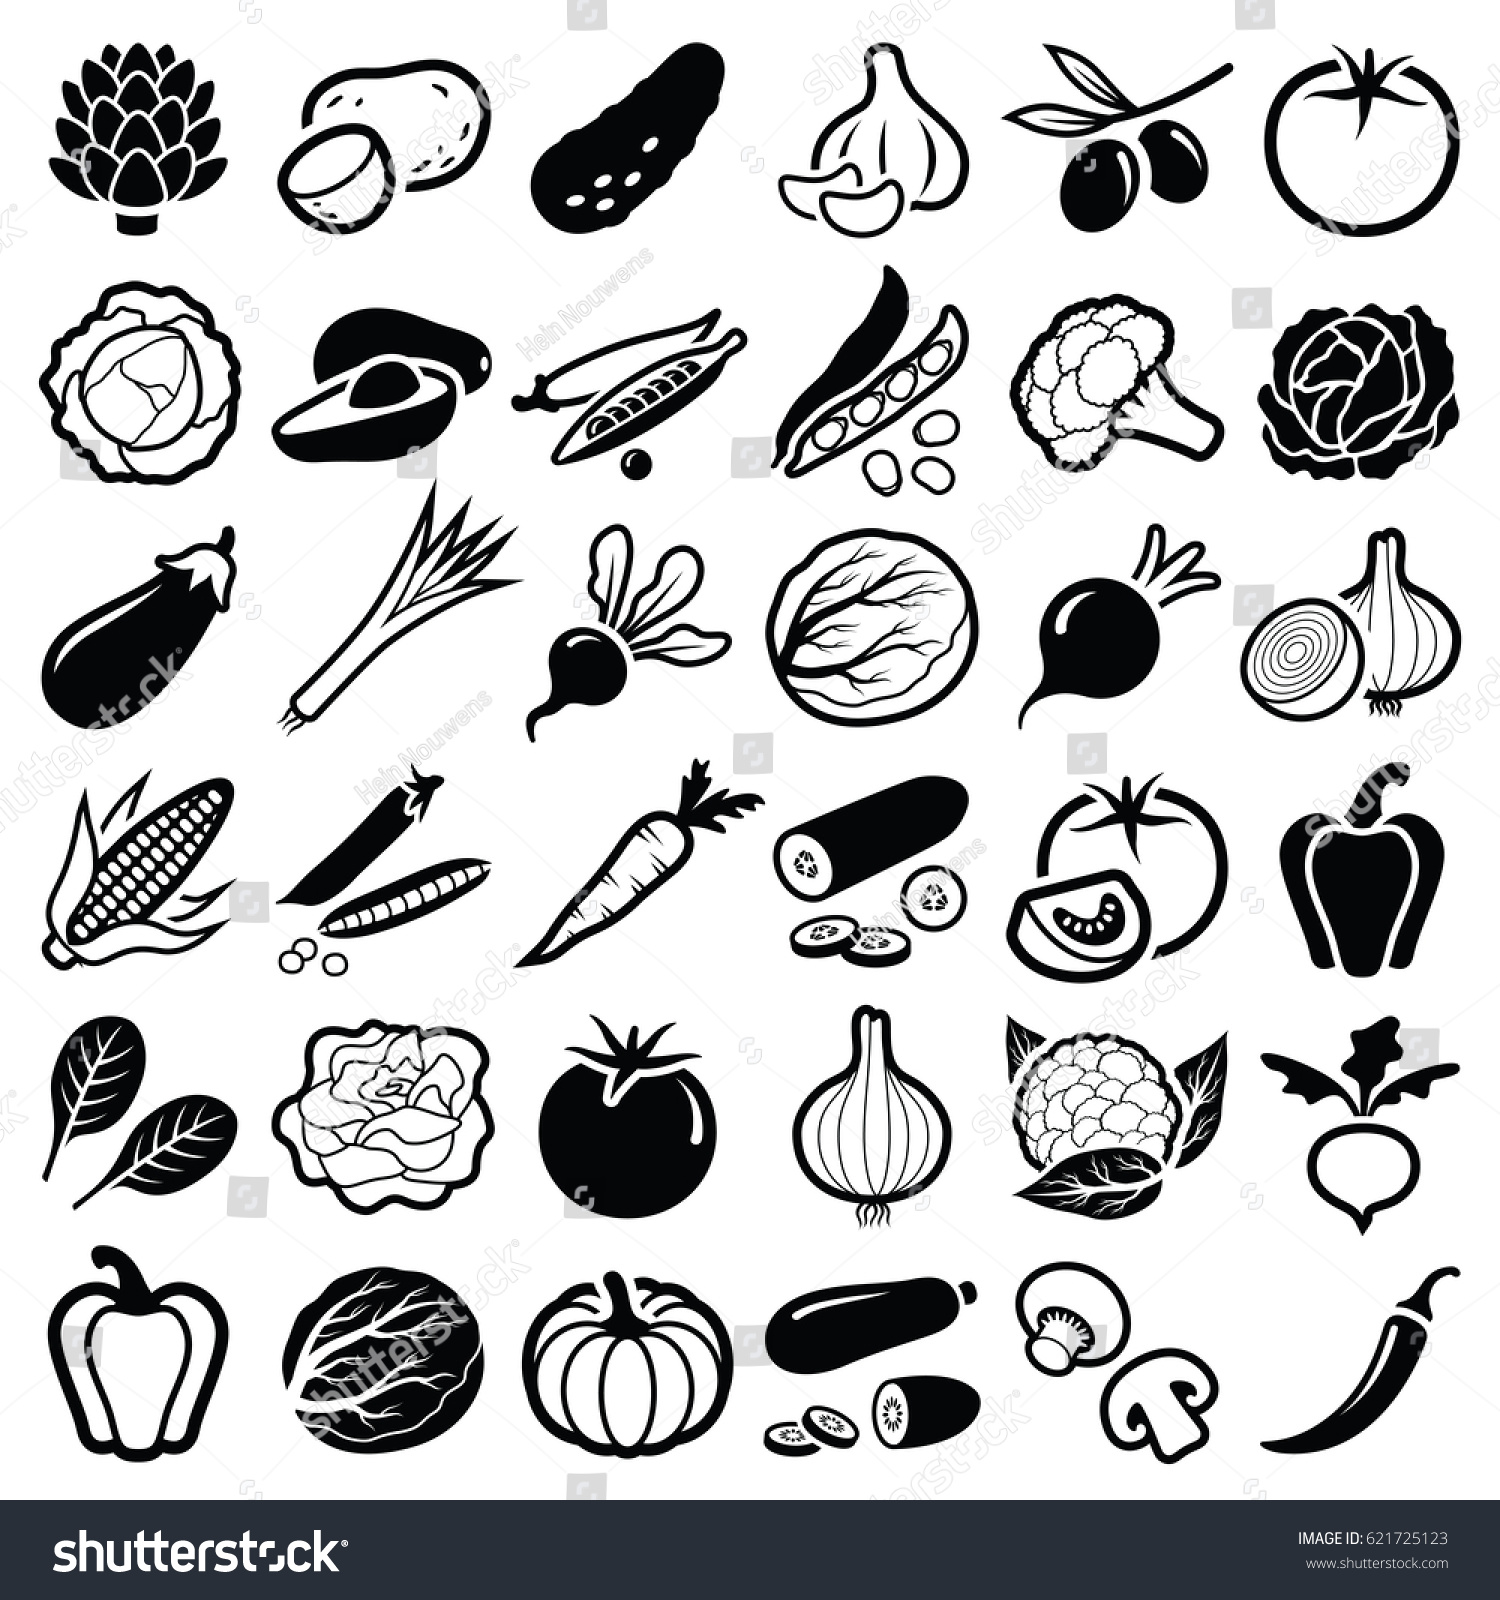 Vegetables icon collection - vector silhouette illustration
 #621725123